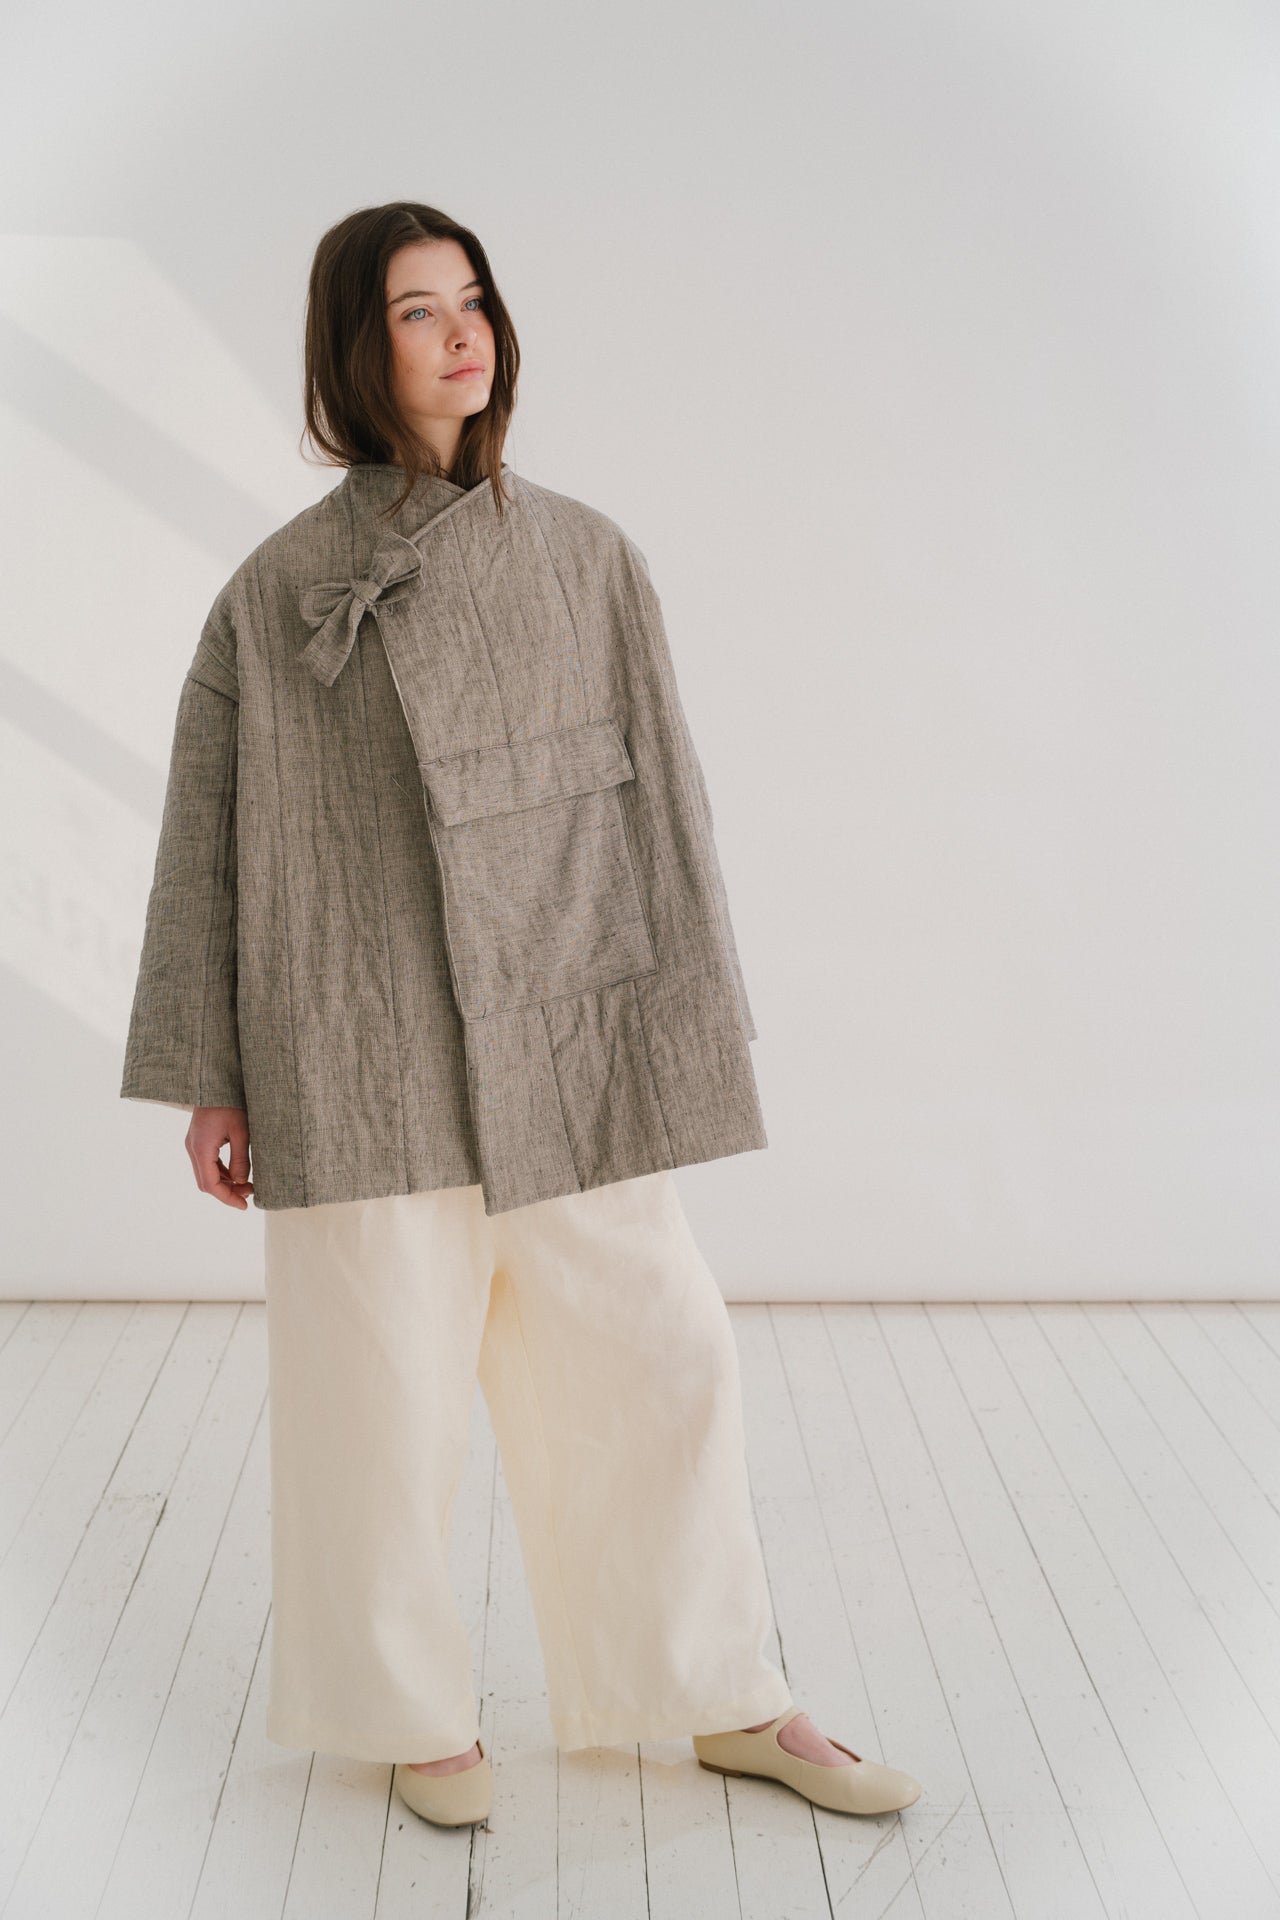 BLANKET JACKET | New for SS24- The Blanket Jacket. Inspired by the idea of wrapping yourself up in a warm blanket to star gaze at night. Cut in a simple kimono shape, hand quilted in our Belfast studio. Created with our new soft black and white check line